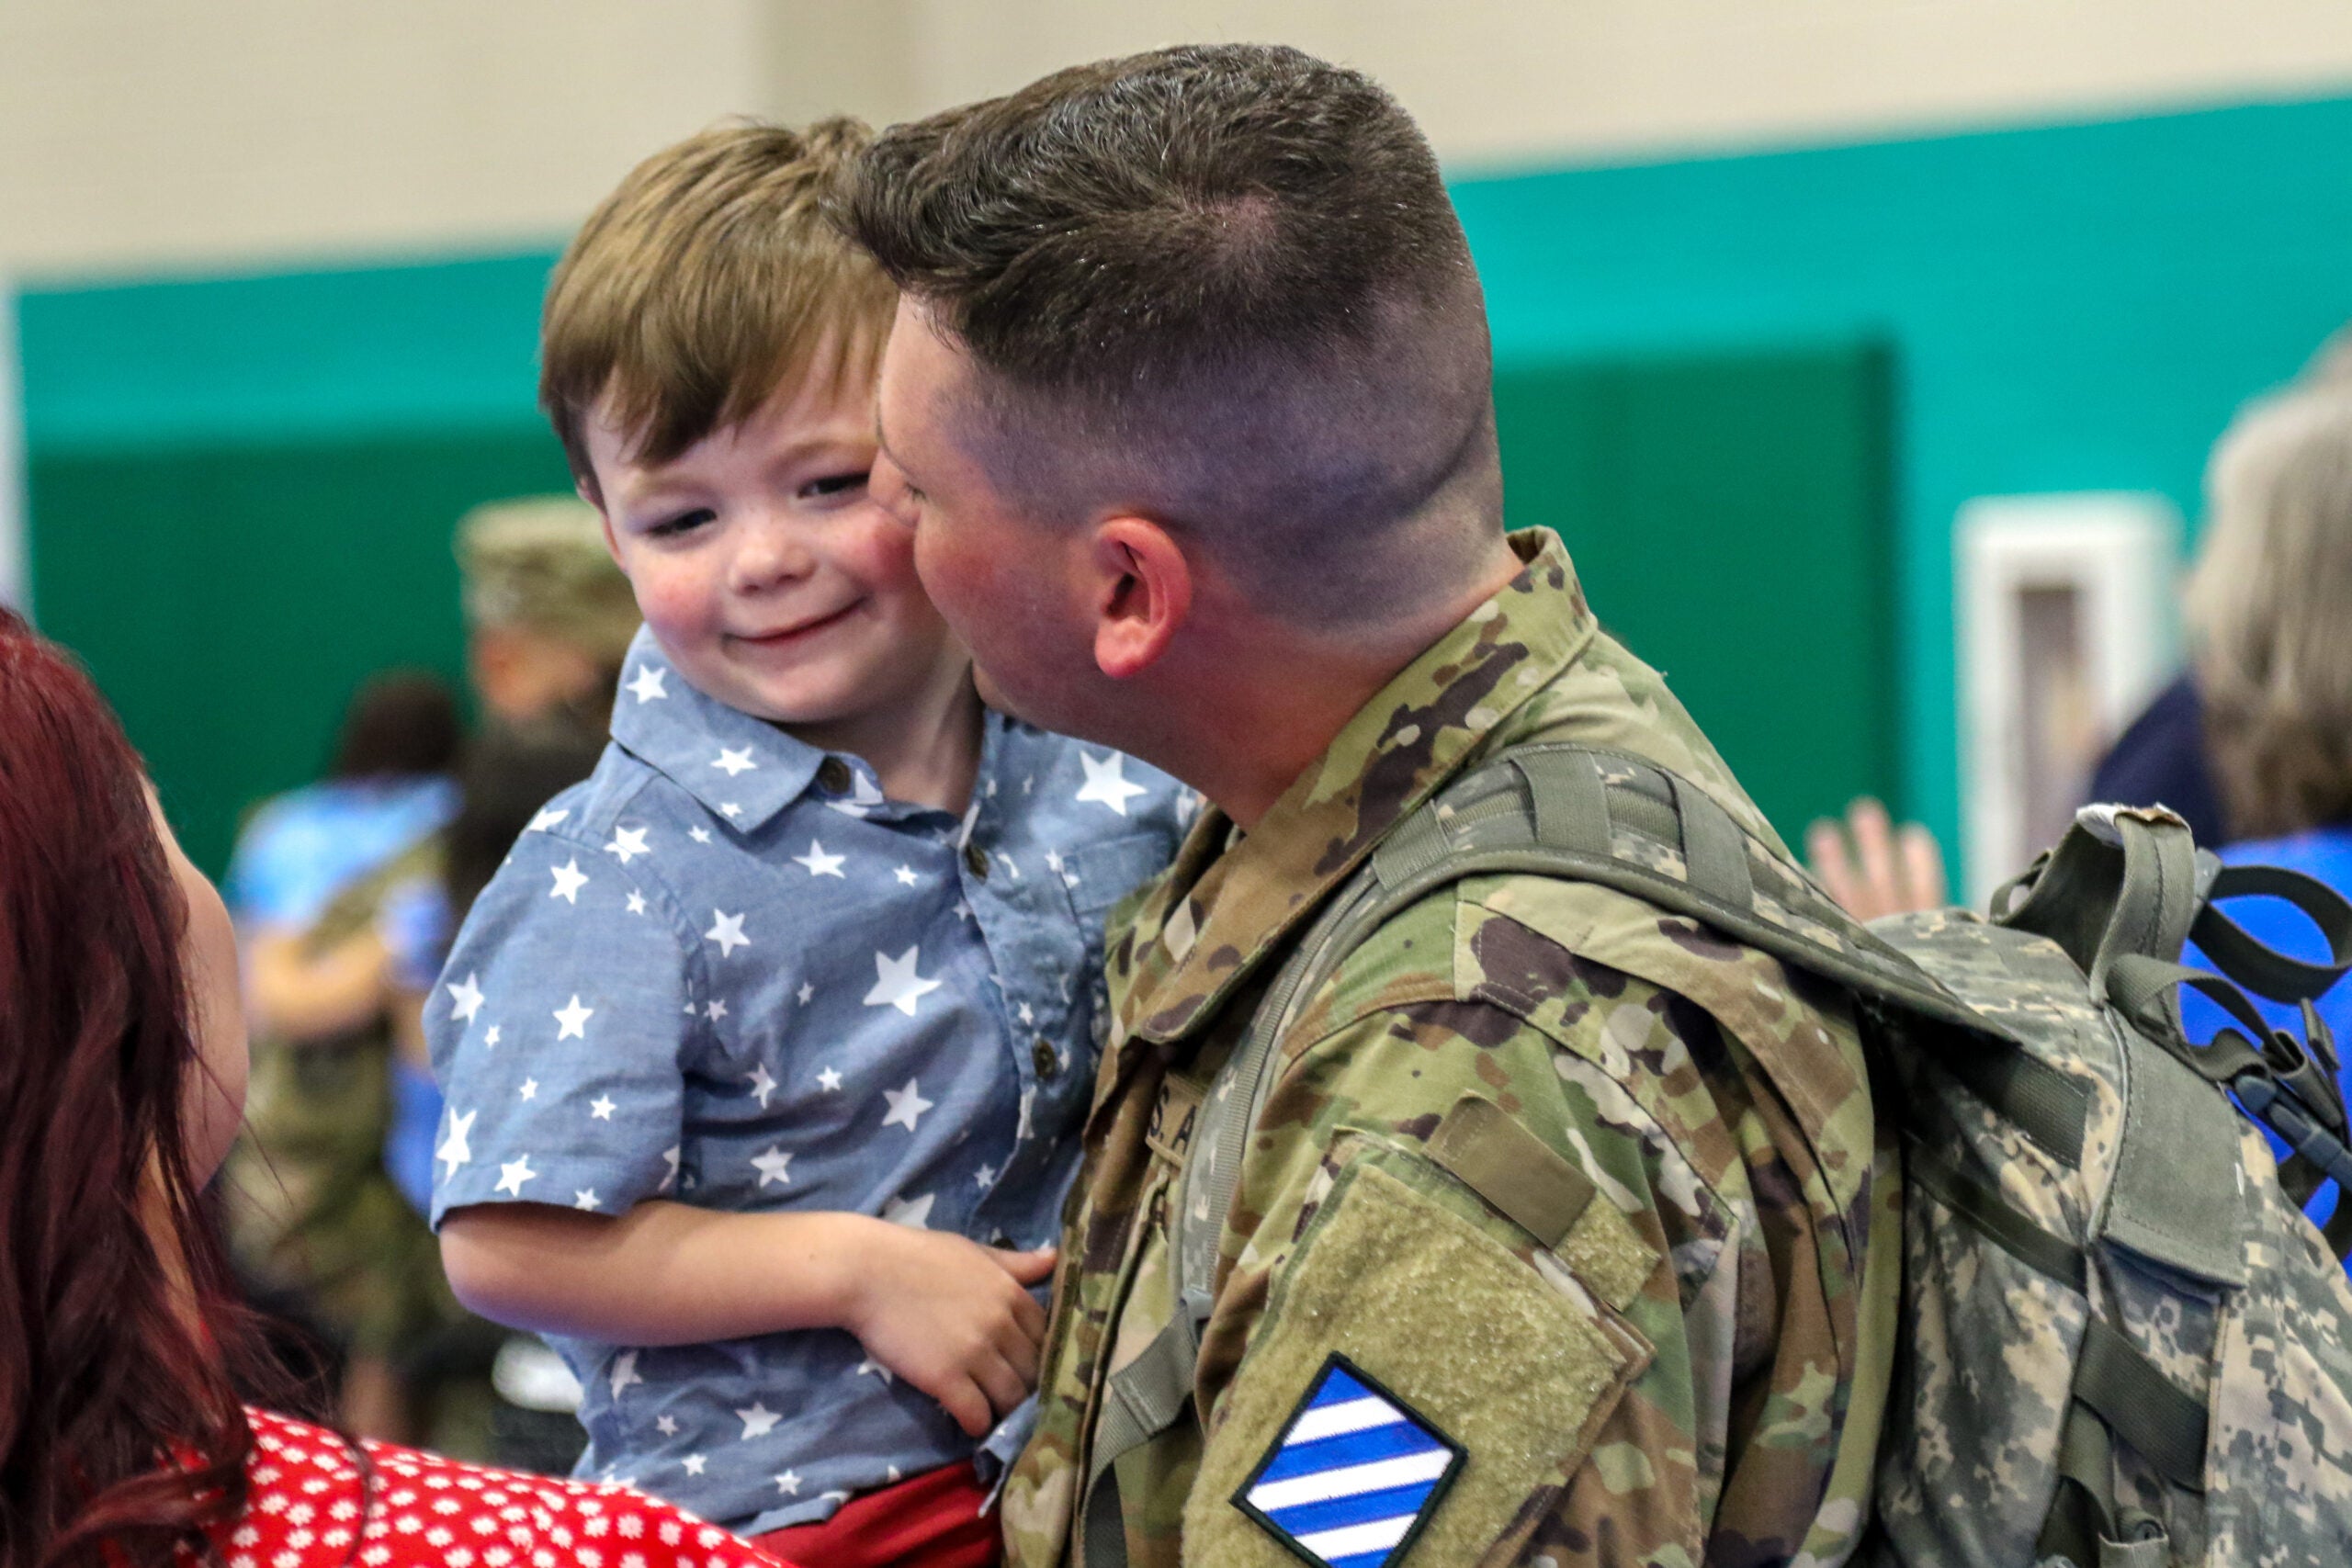 Cpl. Anthony La Rocco shares a tearful reunion with his son during the 1st Armored Brigade Combat Team, 3rd Infantry Division return to Fort Stewart, Georgia, July 2, following a nine-month deployment to South Korea. The Raider Brigade was one of the first in the Army to resume major training events and deploy amidst the COVID-19 pandemic, developing procedures adopted across the Army in order to maintain mission readiness and global commitments to allies and partners. (U.S. Army photo by Sgt. 1st Class Jason Hull)